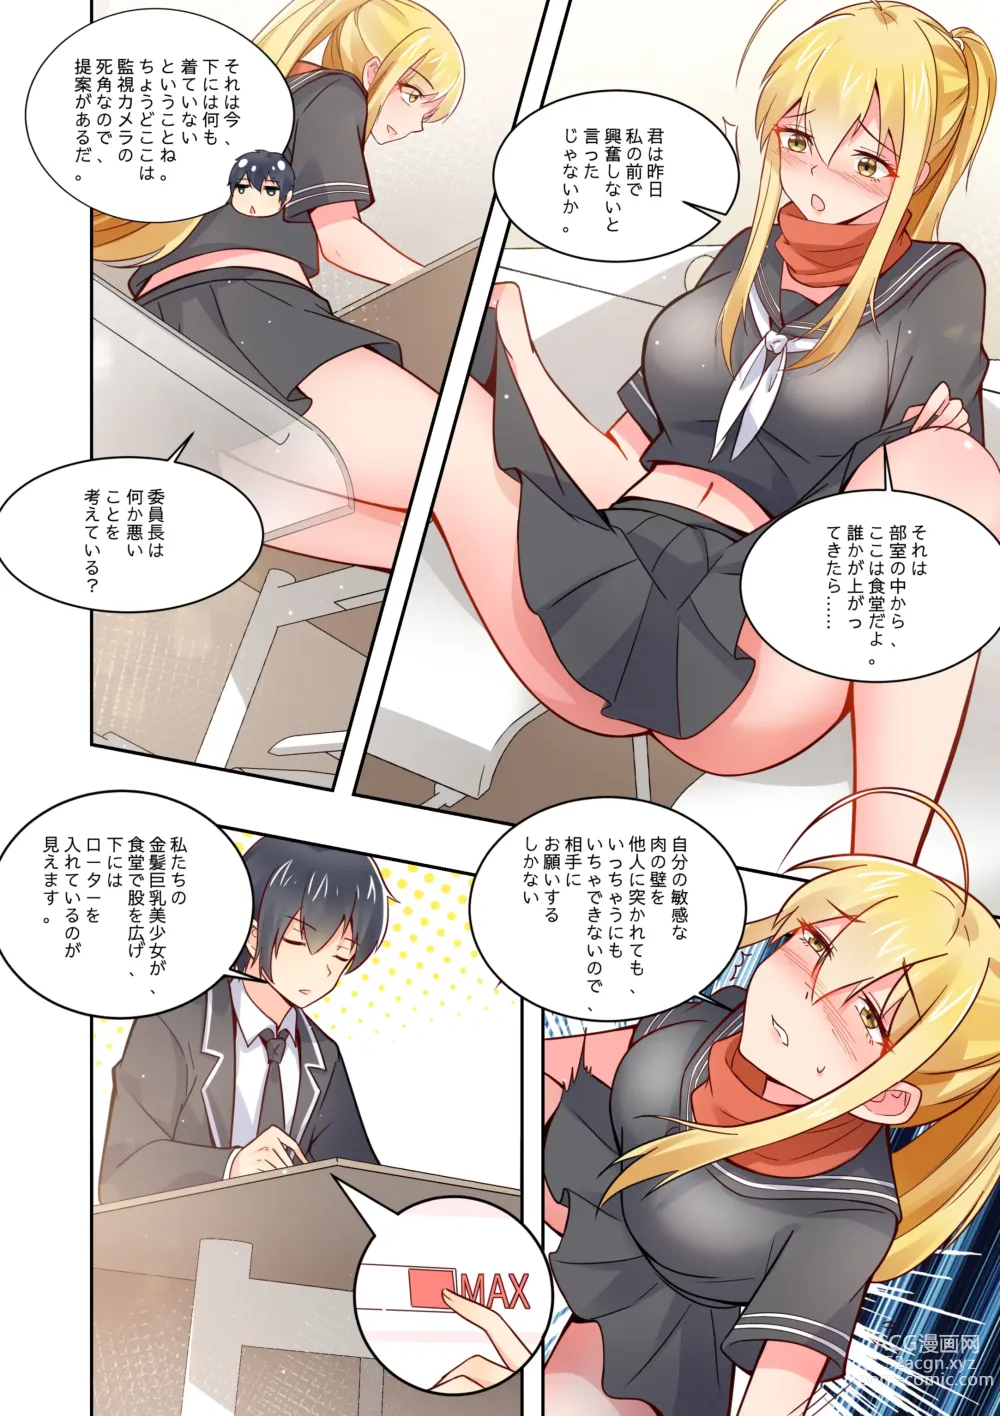 Page 25 of doujinshi ノーパン彼女